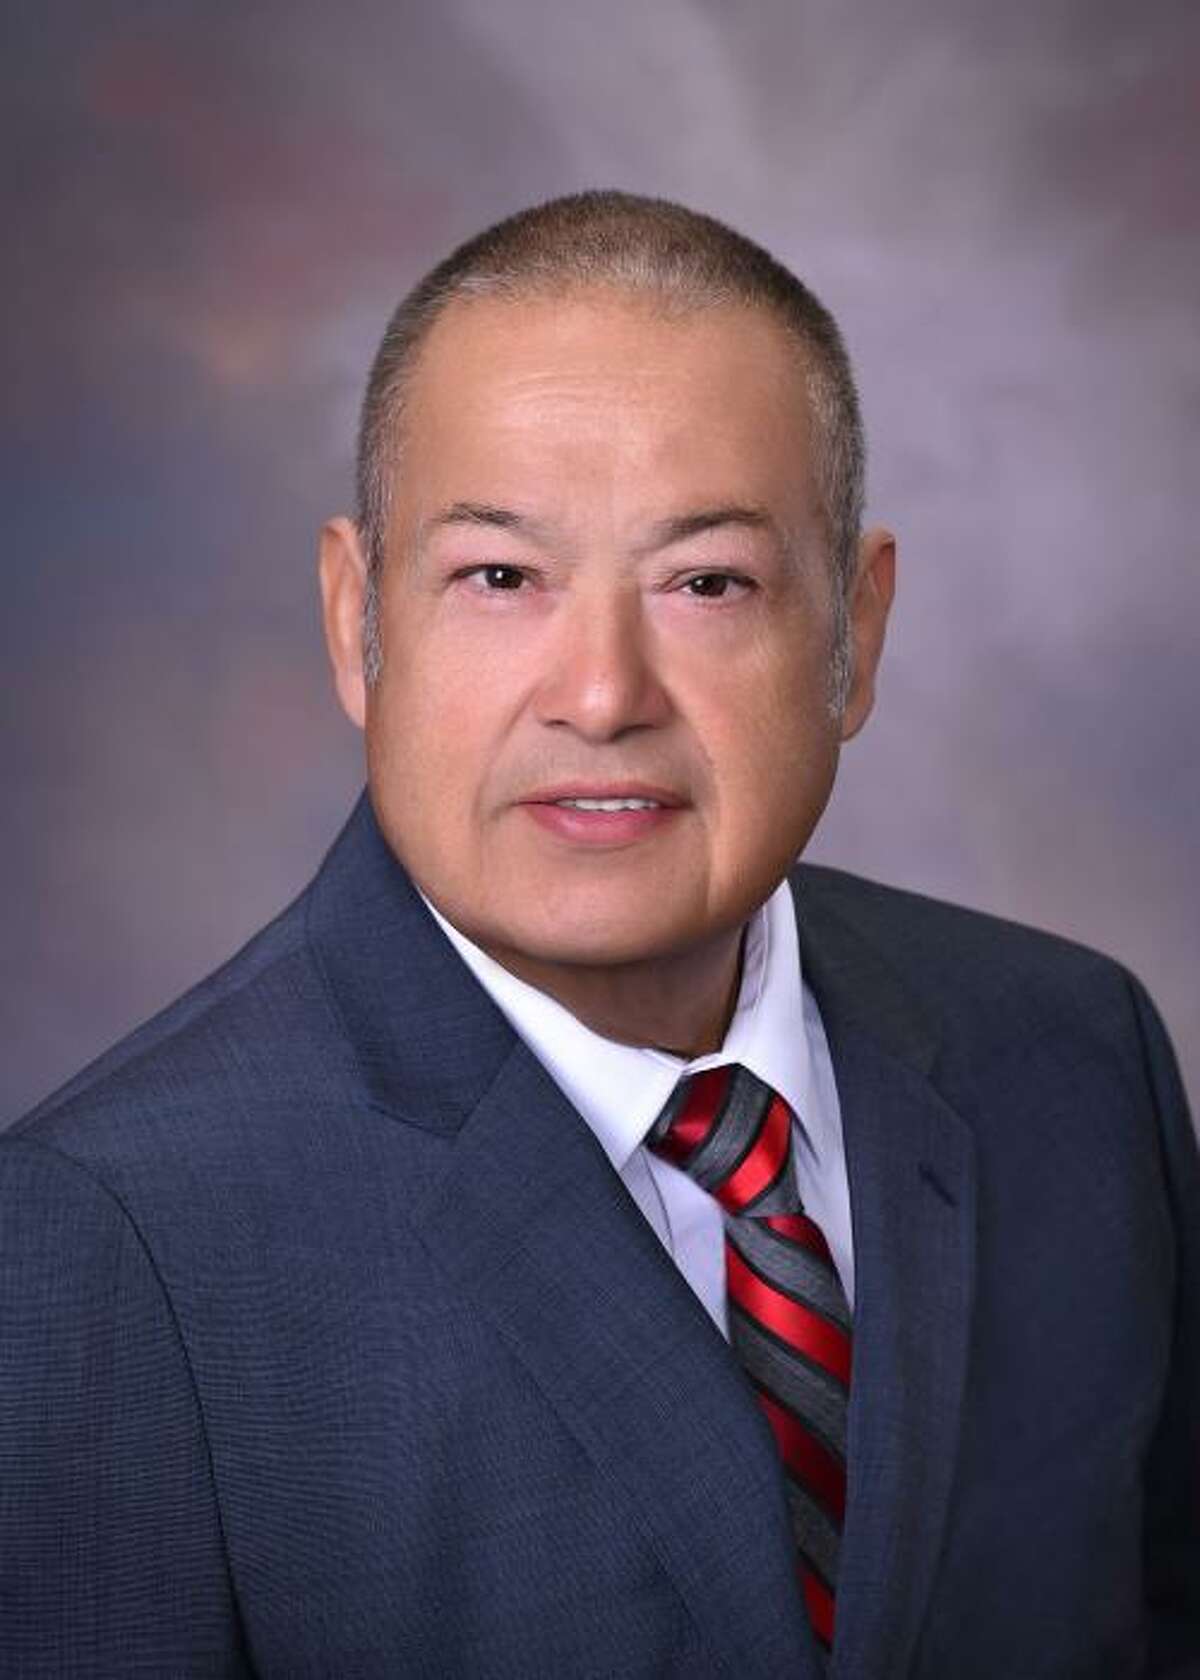 UISD Board Member and Parliamentarian Ricardo Molina, 69, died on Thursday, Dec. 29, 2022. He served for more than 25 years on the board and the community centers of Rio Bravo and El Cenizo.